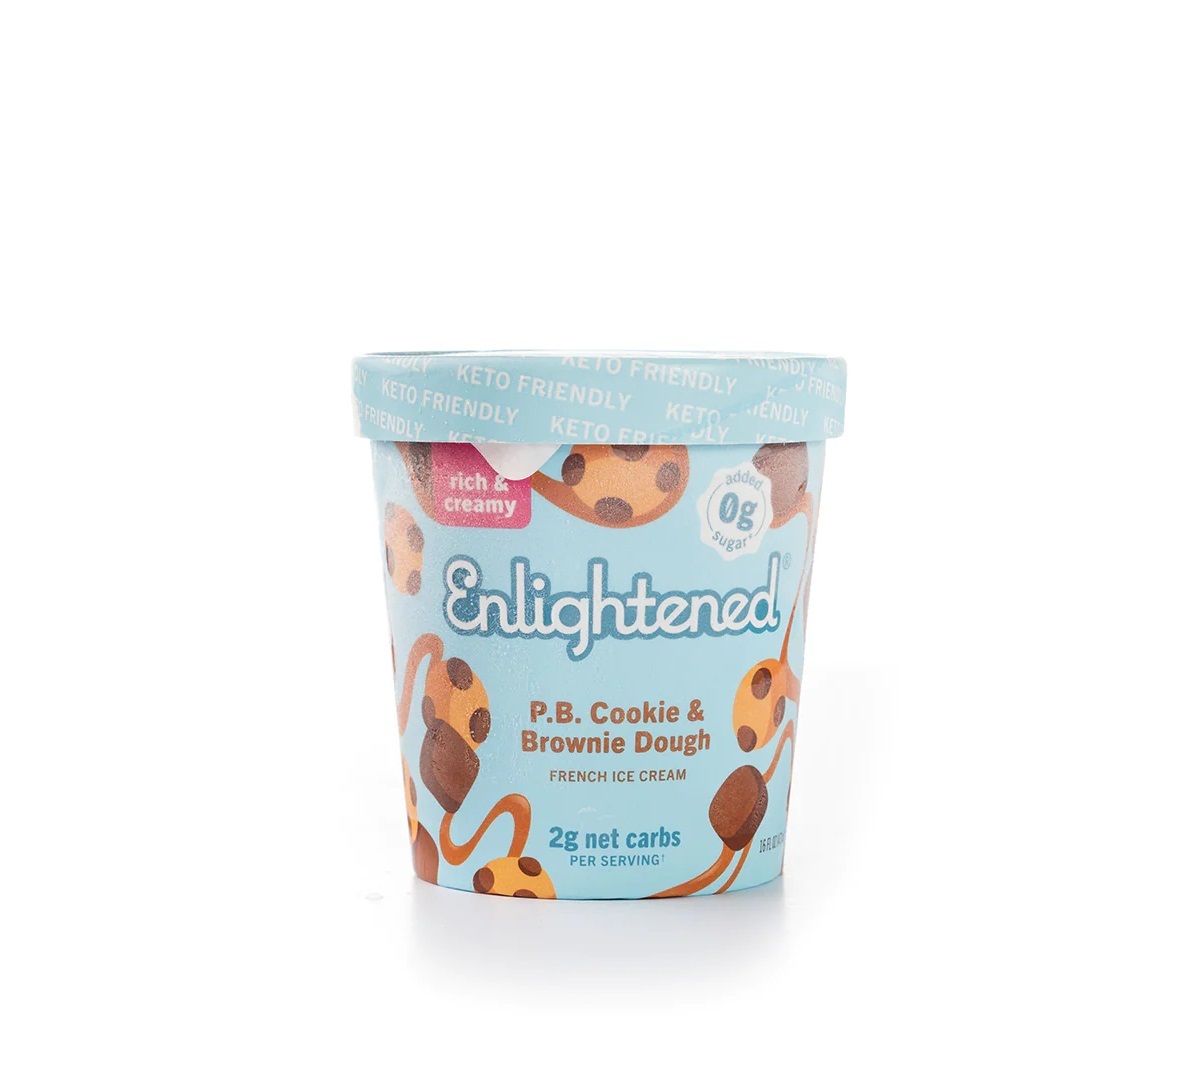 15-enlightened-ice-cream-nutrition-facts